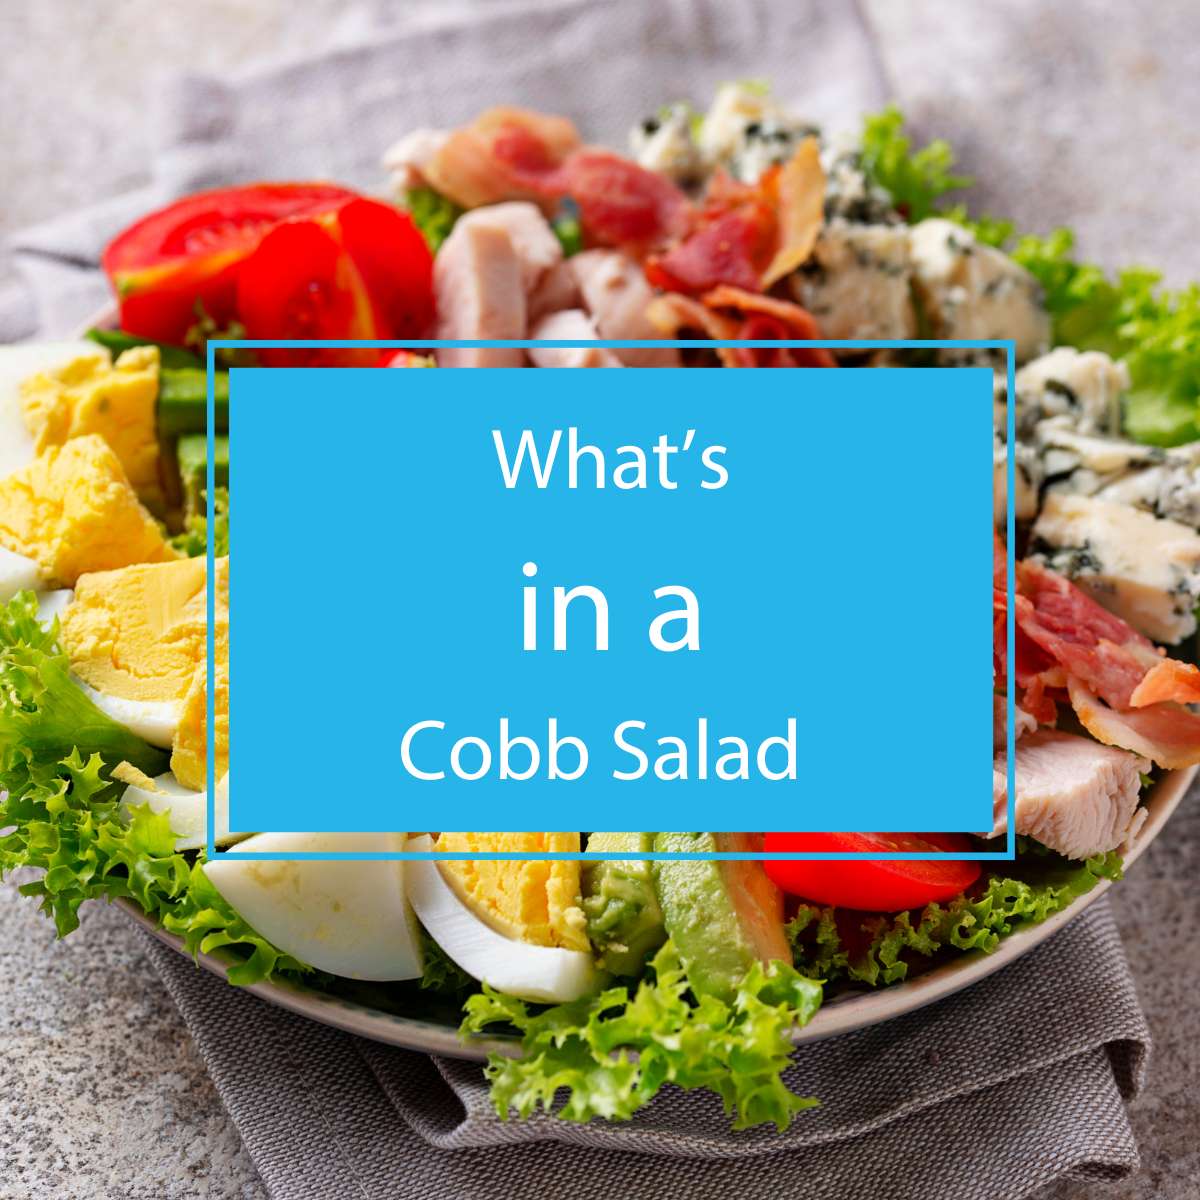 What's In a Cobb Salad